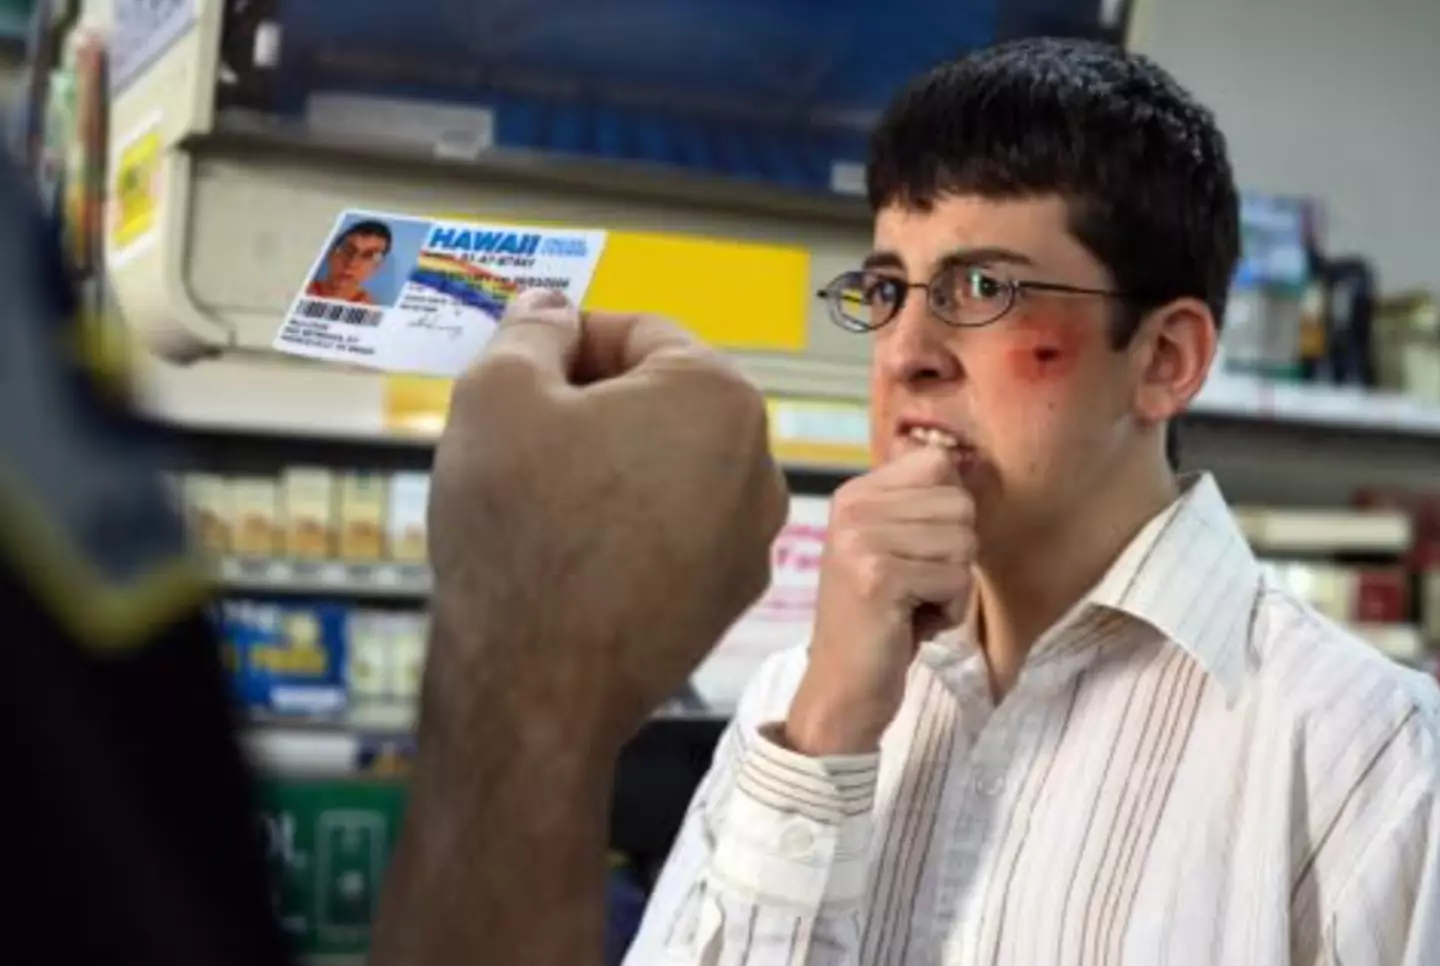 Nobody else could have played the role of McLovin quite like Christopher Mintz-Plasse did.